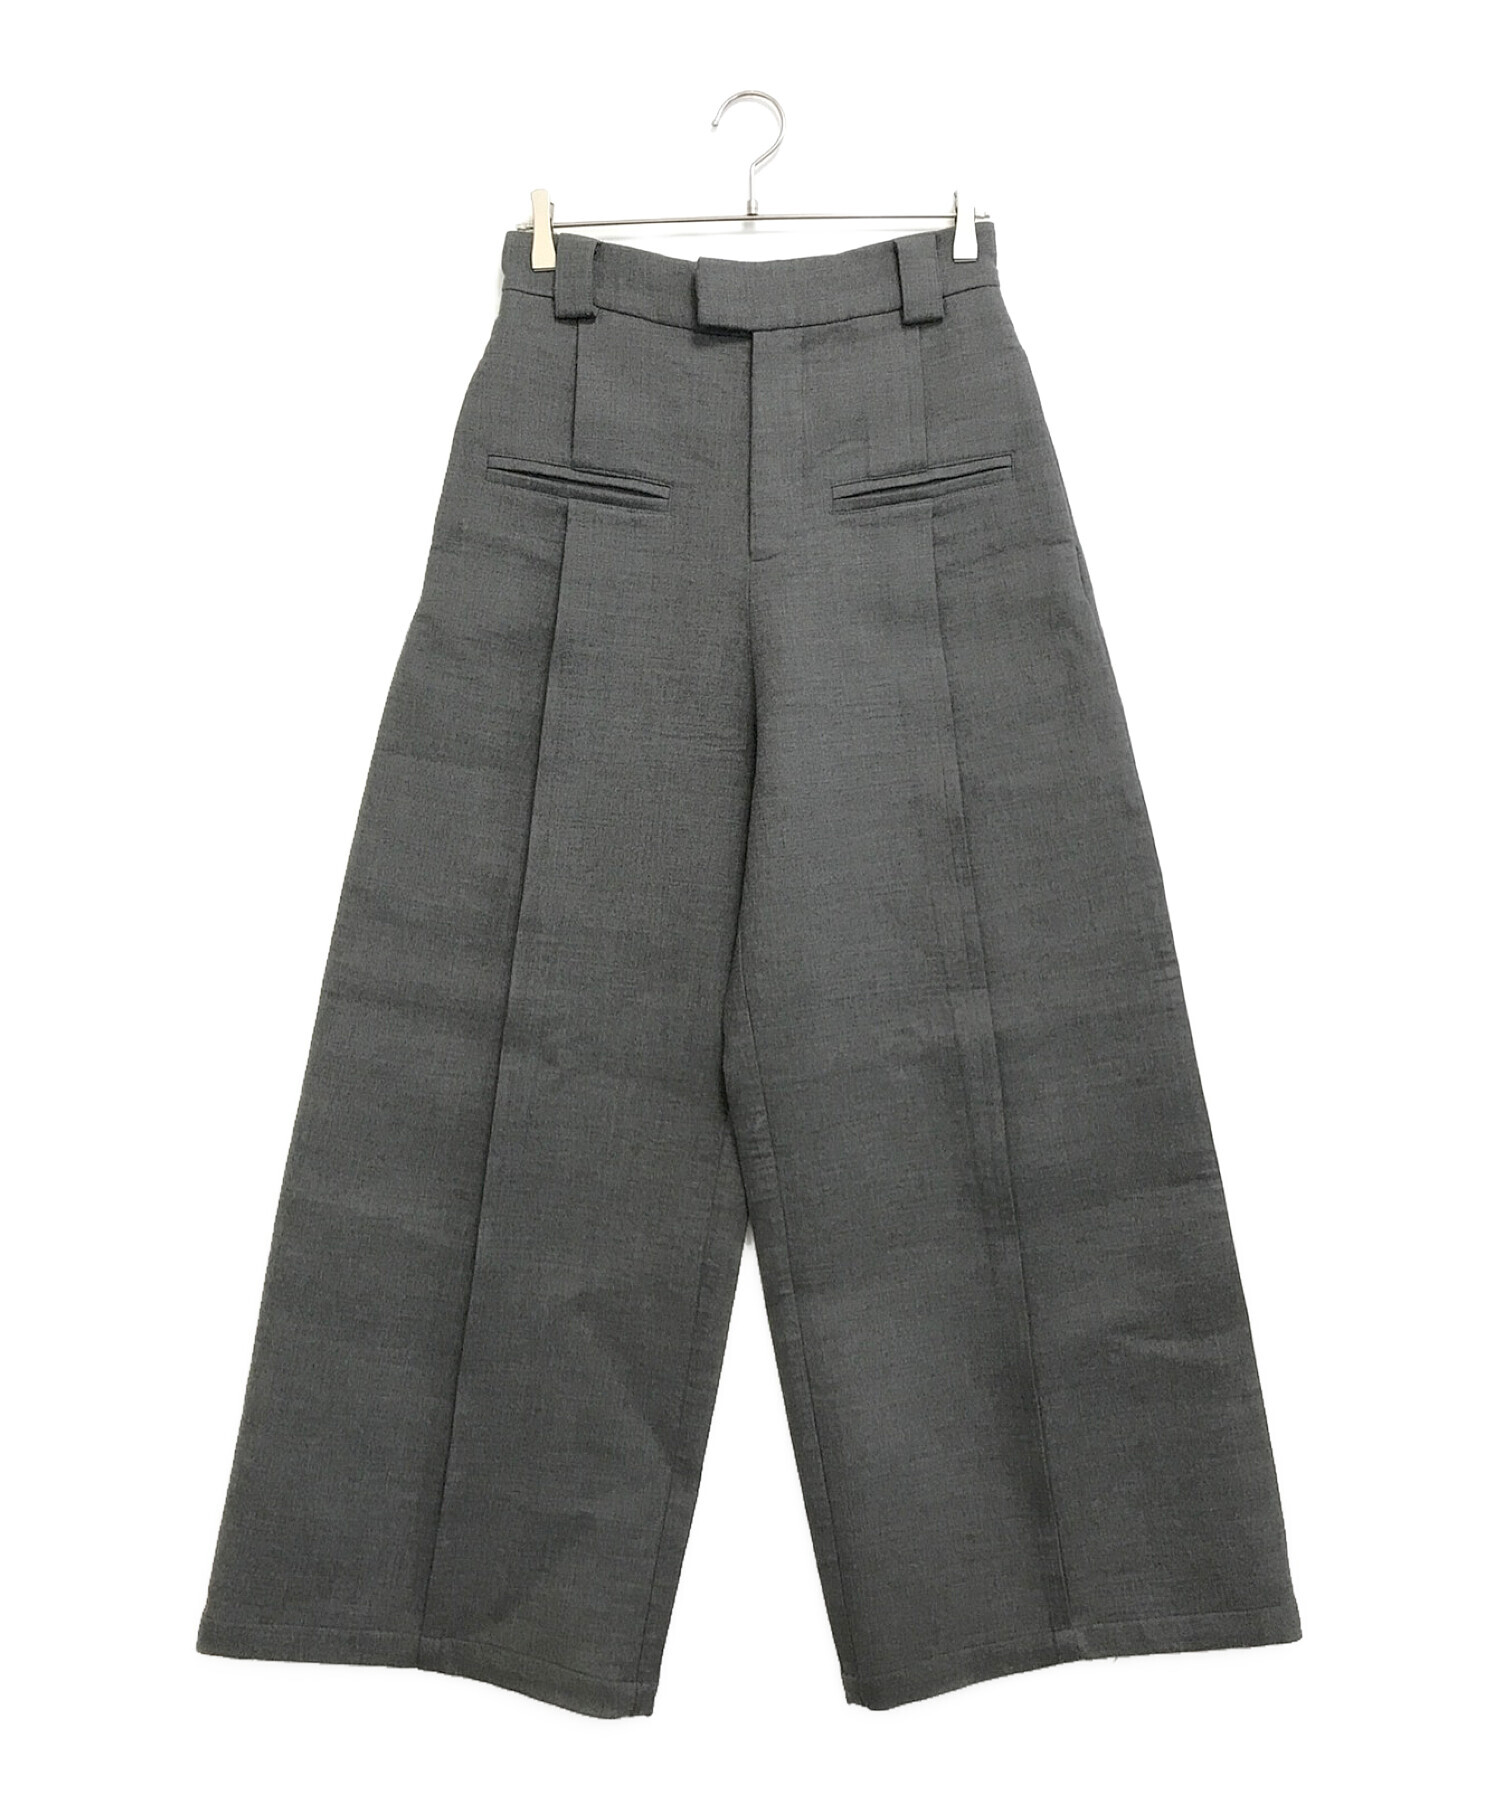 faxcopyexpress hand in front pocket pant 【60％OFF】 - パンツ